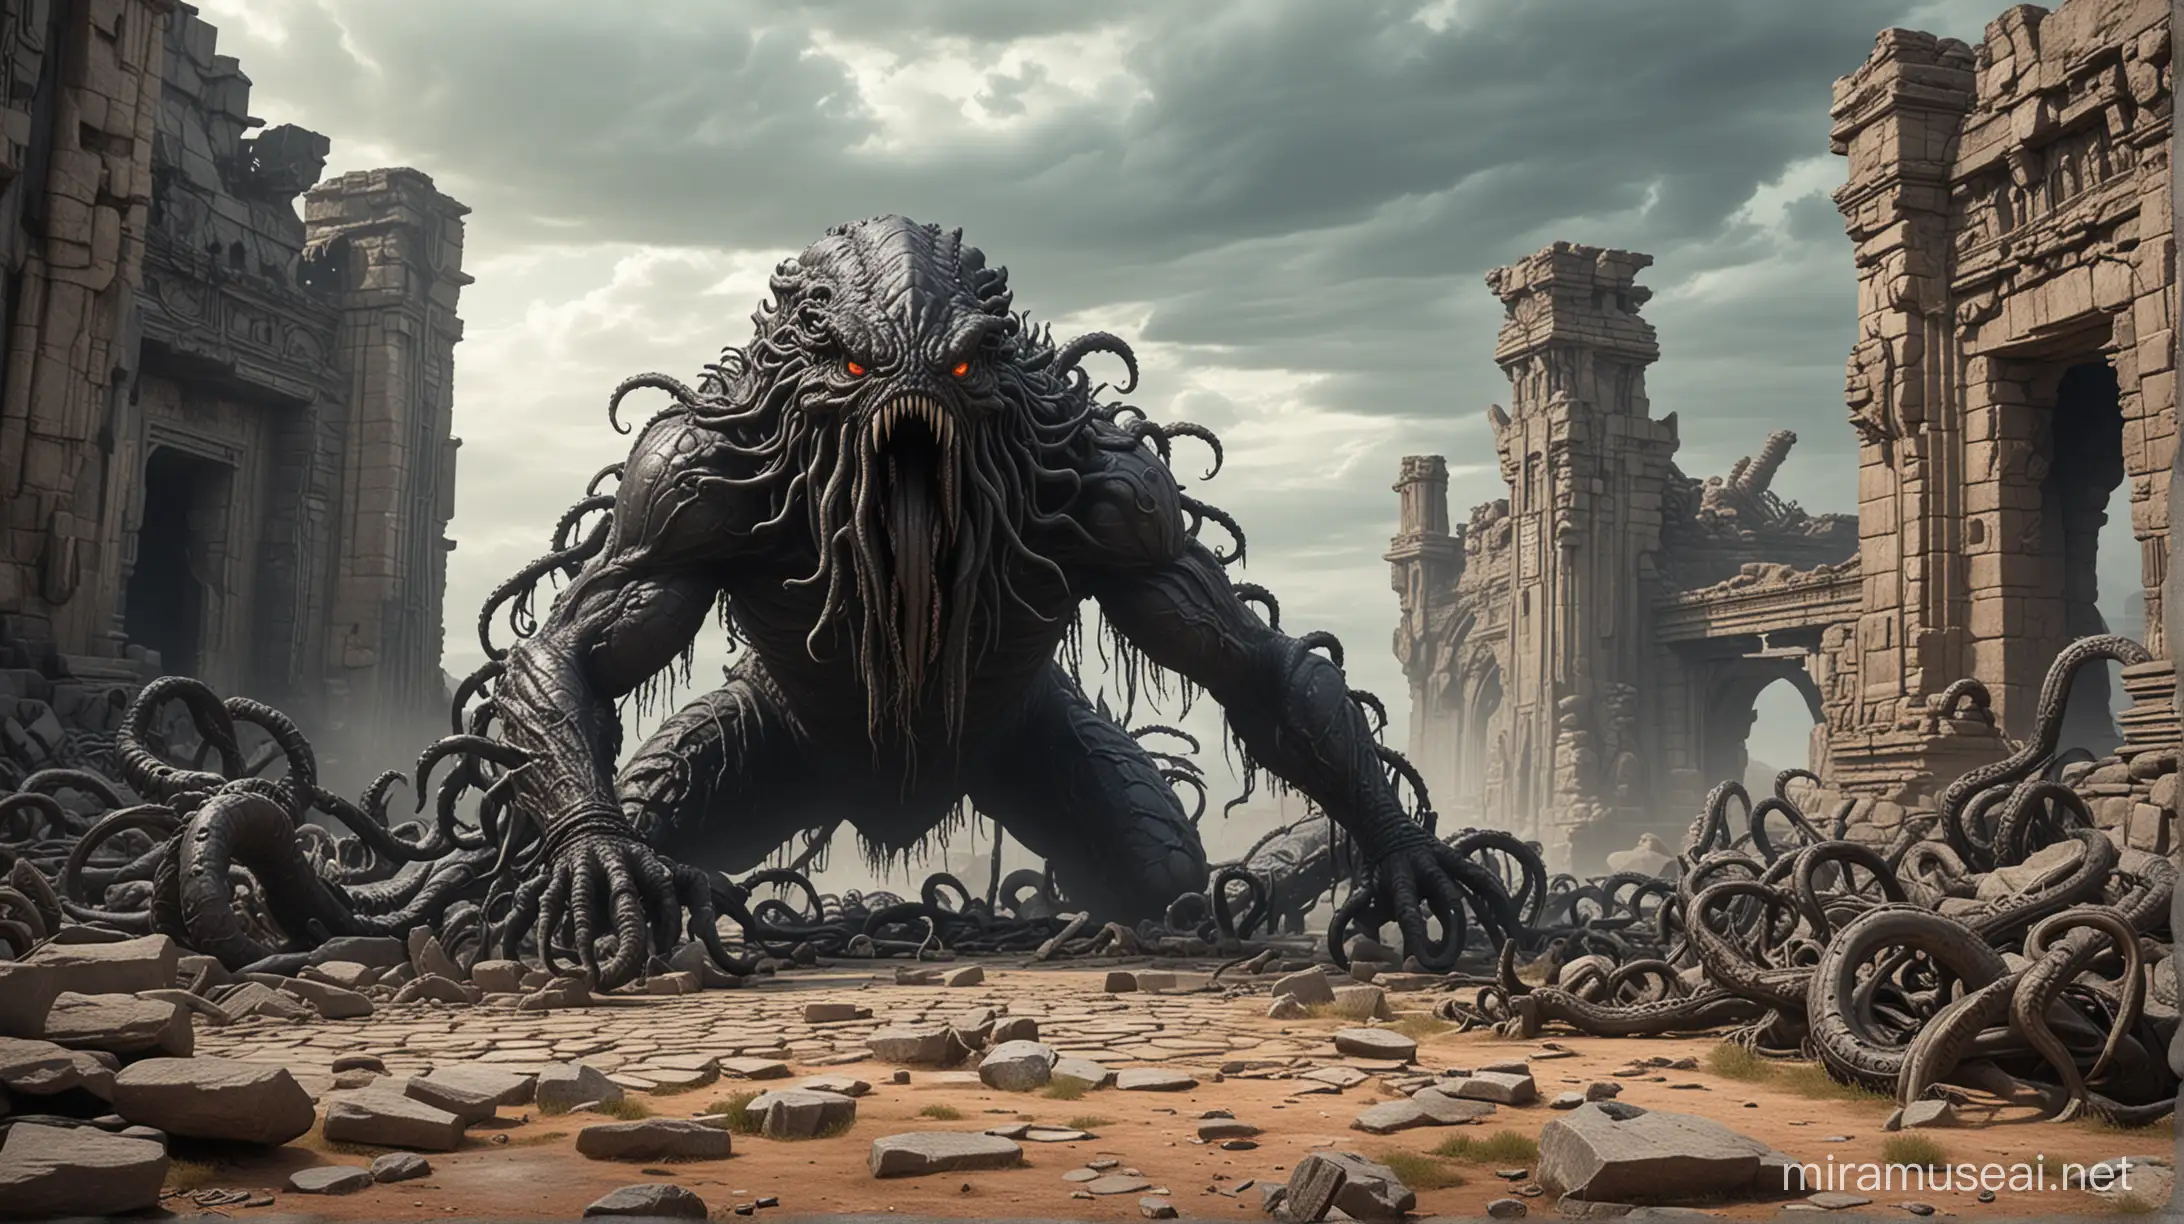 A giant lovecratian monster, black tentacles, crouched and snarling in front of ancient alien stone and metal ruins, bleak.